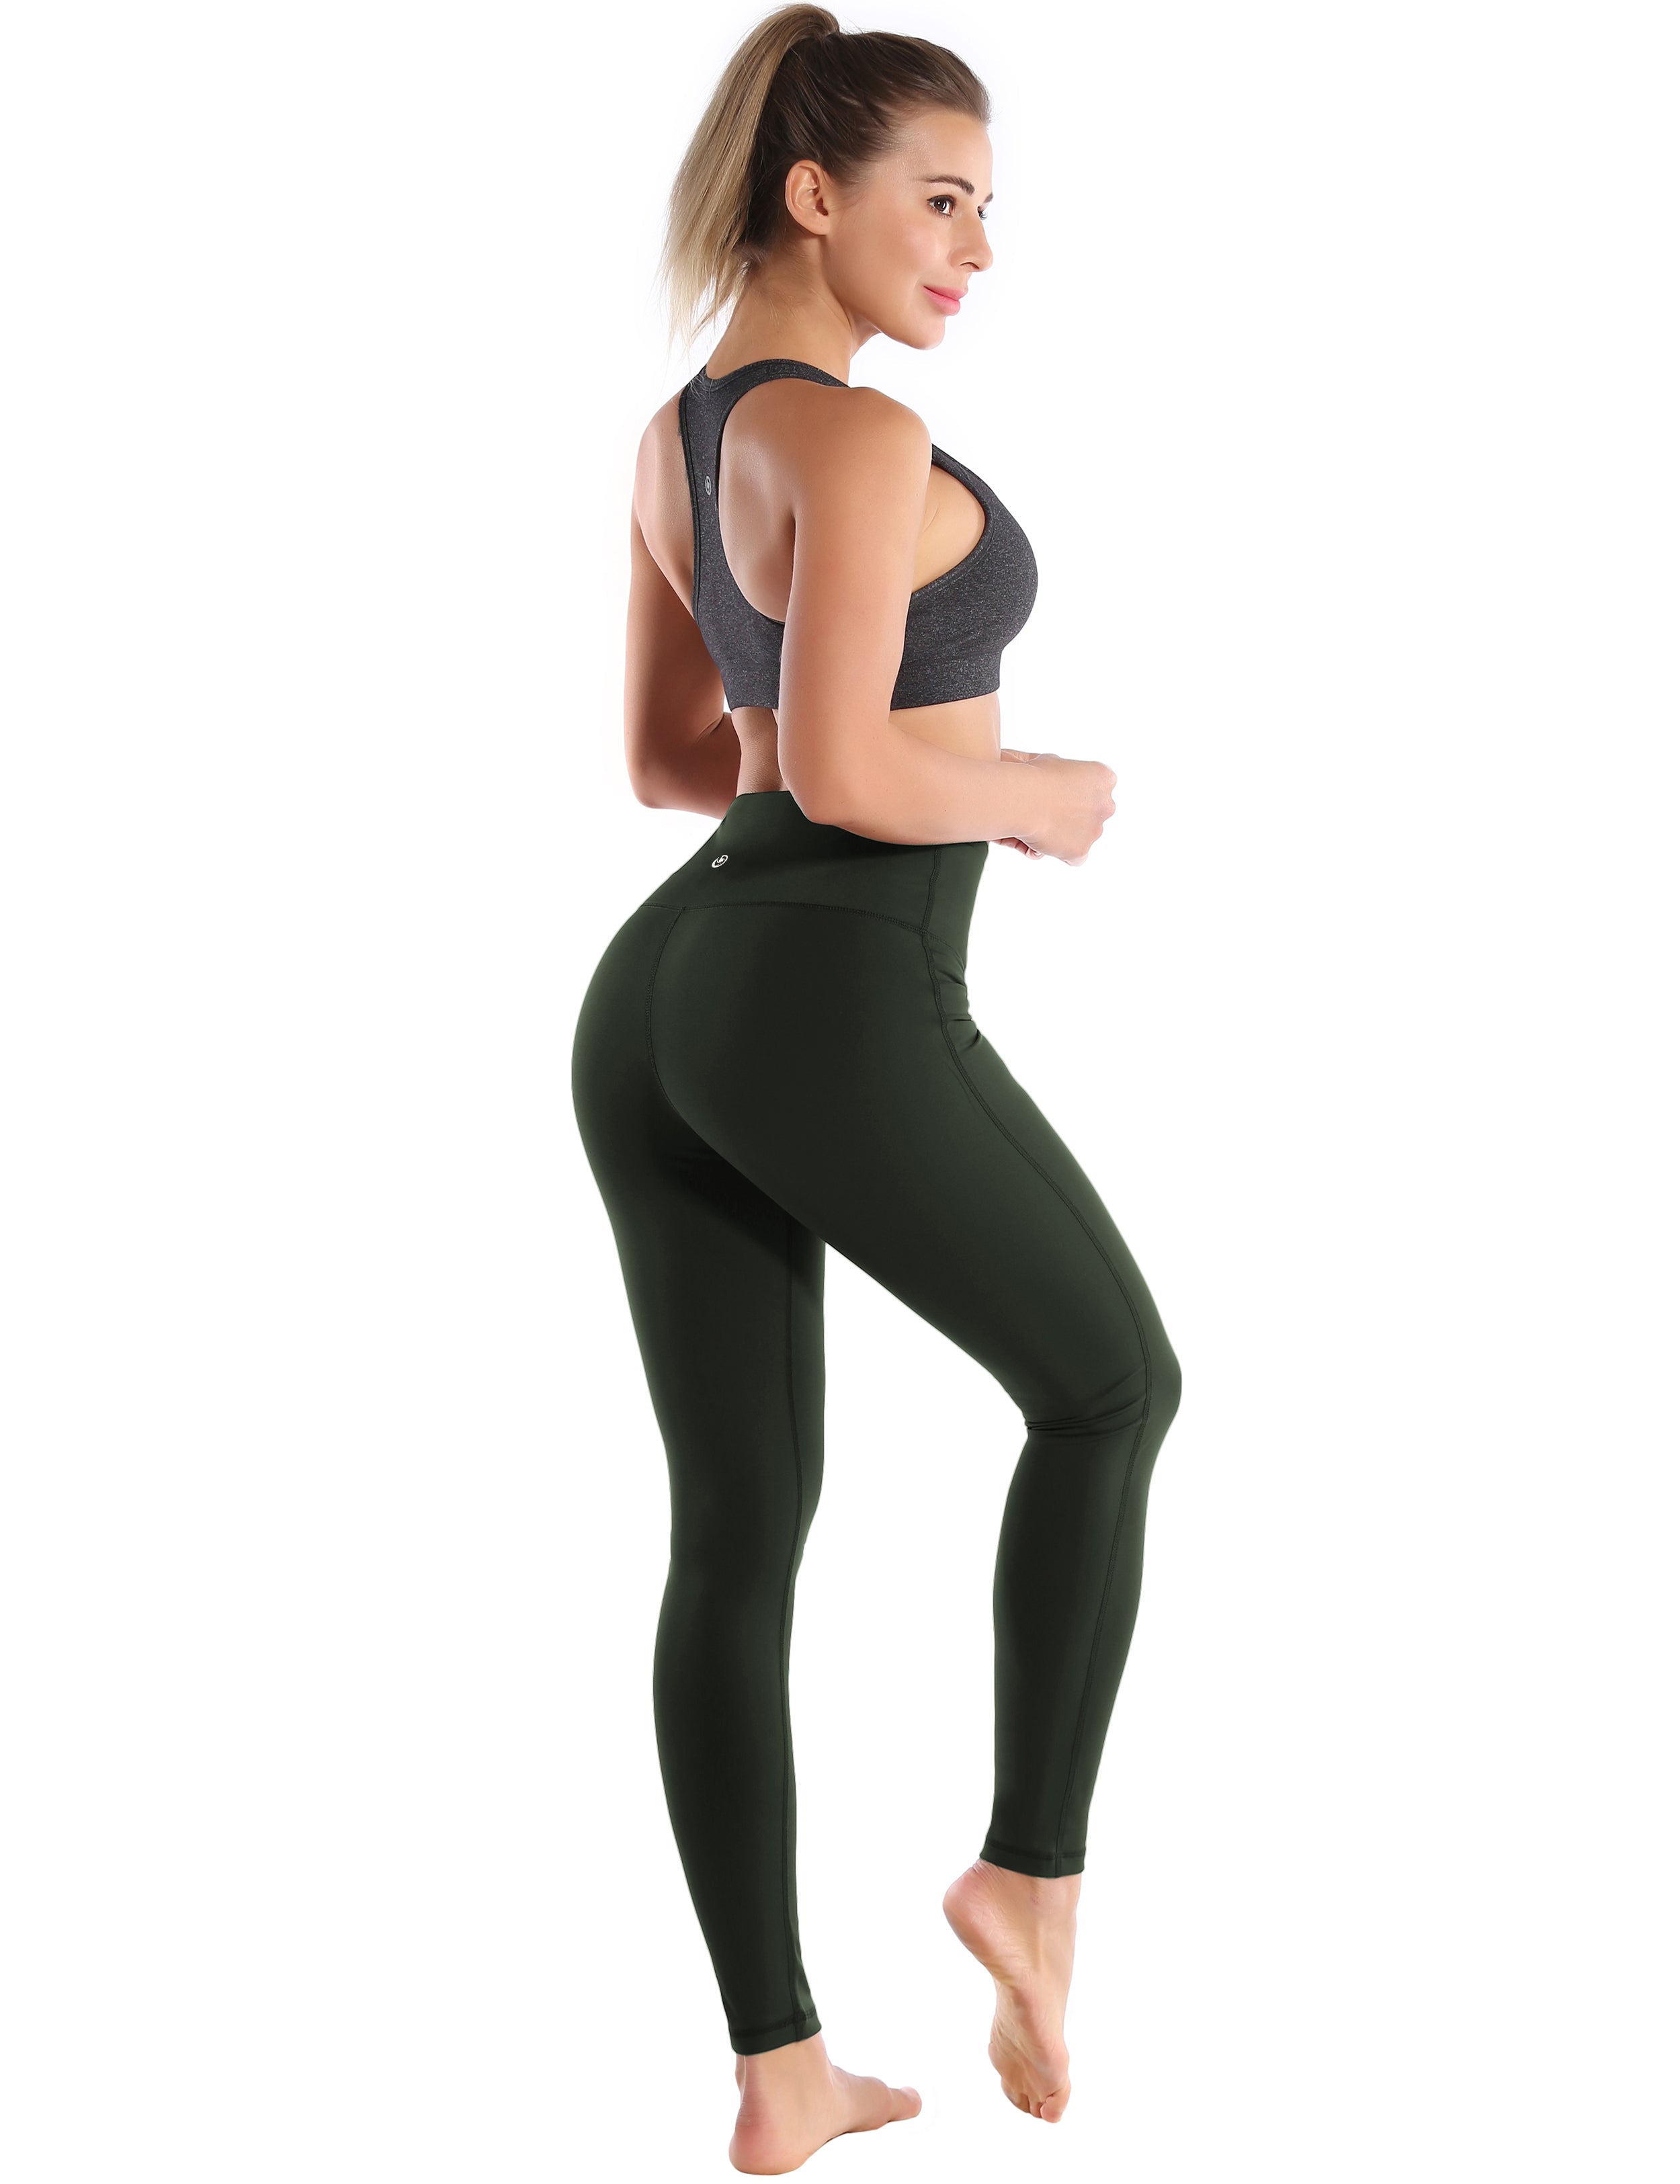 High Waist Side Line Pilates Pants olivegray Side Line is Make Your Legs Look Longer and Thinner 75%Nylon/25%Spandex Fabric doesn't attract lint easily 4-way stretch No see-through Moisture-wicking Tummy control Inner pocket Two lengths